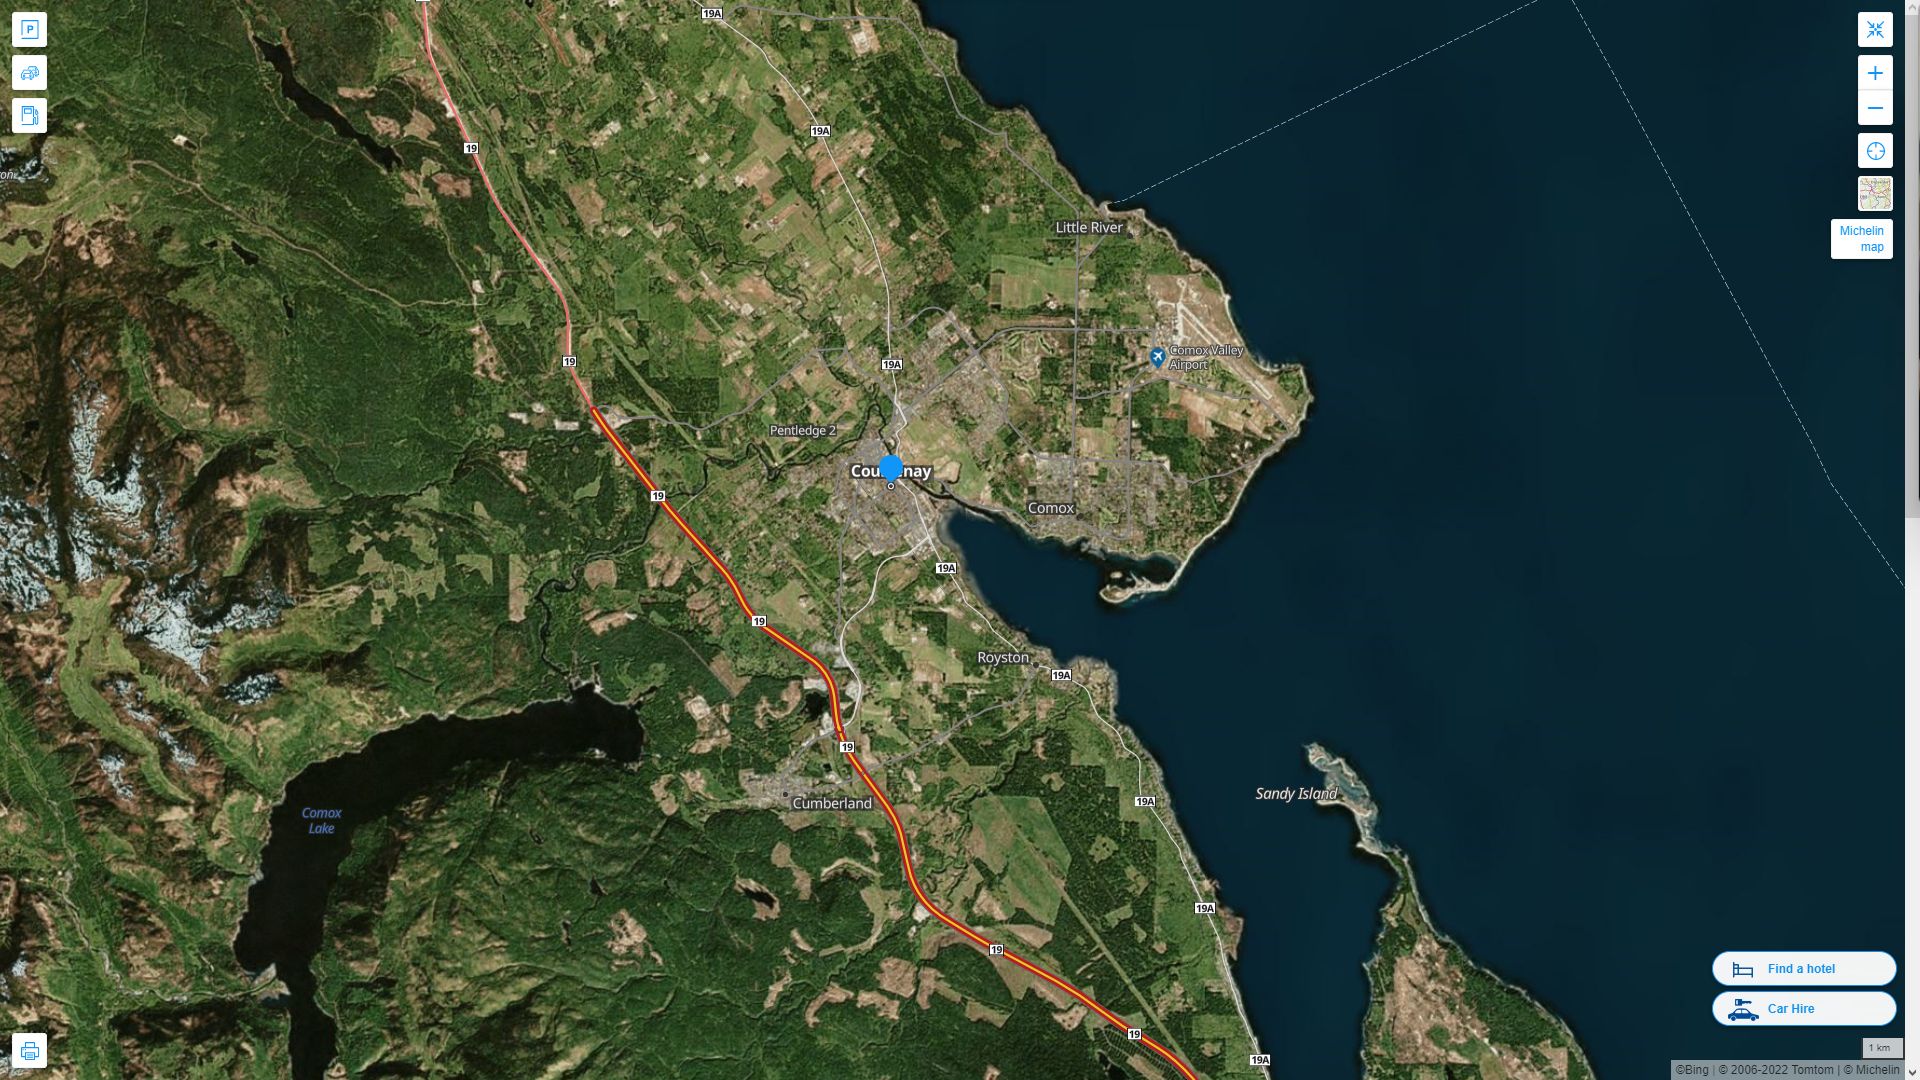 Courtenay Highway and Road Map with Satellite View